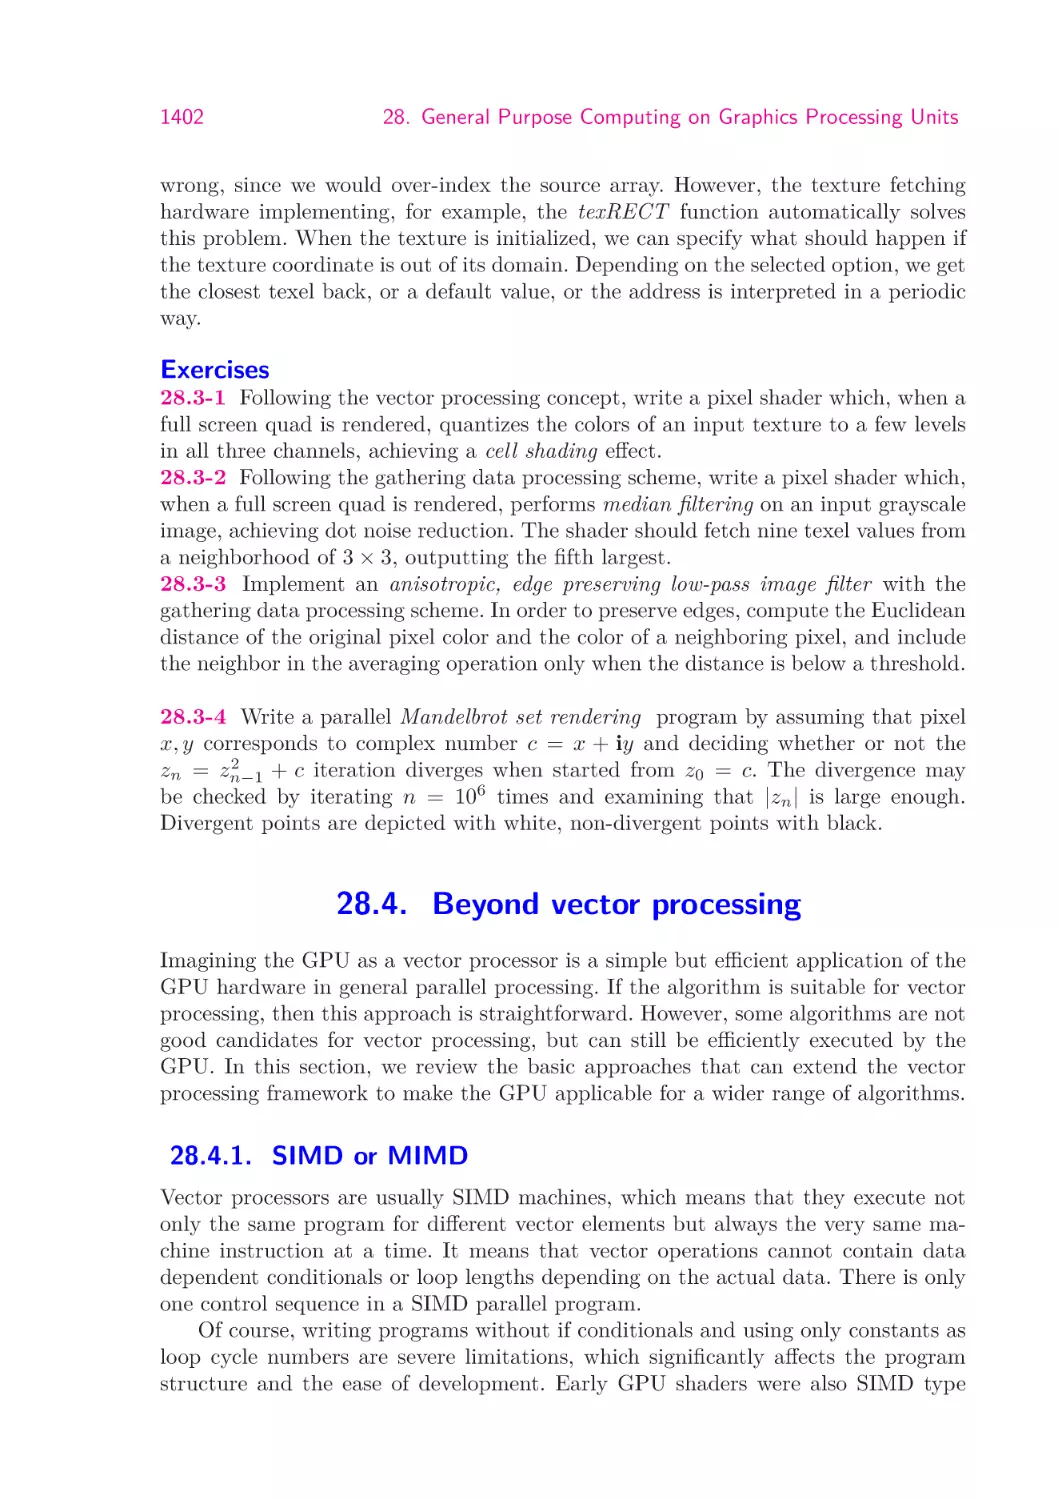 28.4.  Beyond vector processing
28.4.1.  SIMD or MIMD